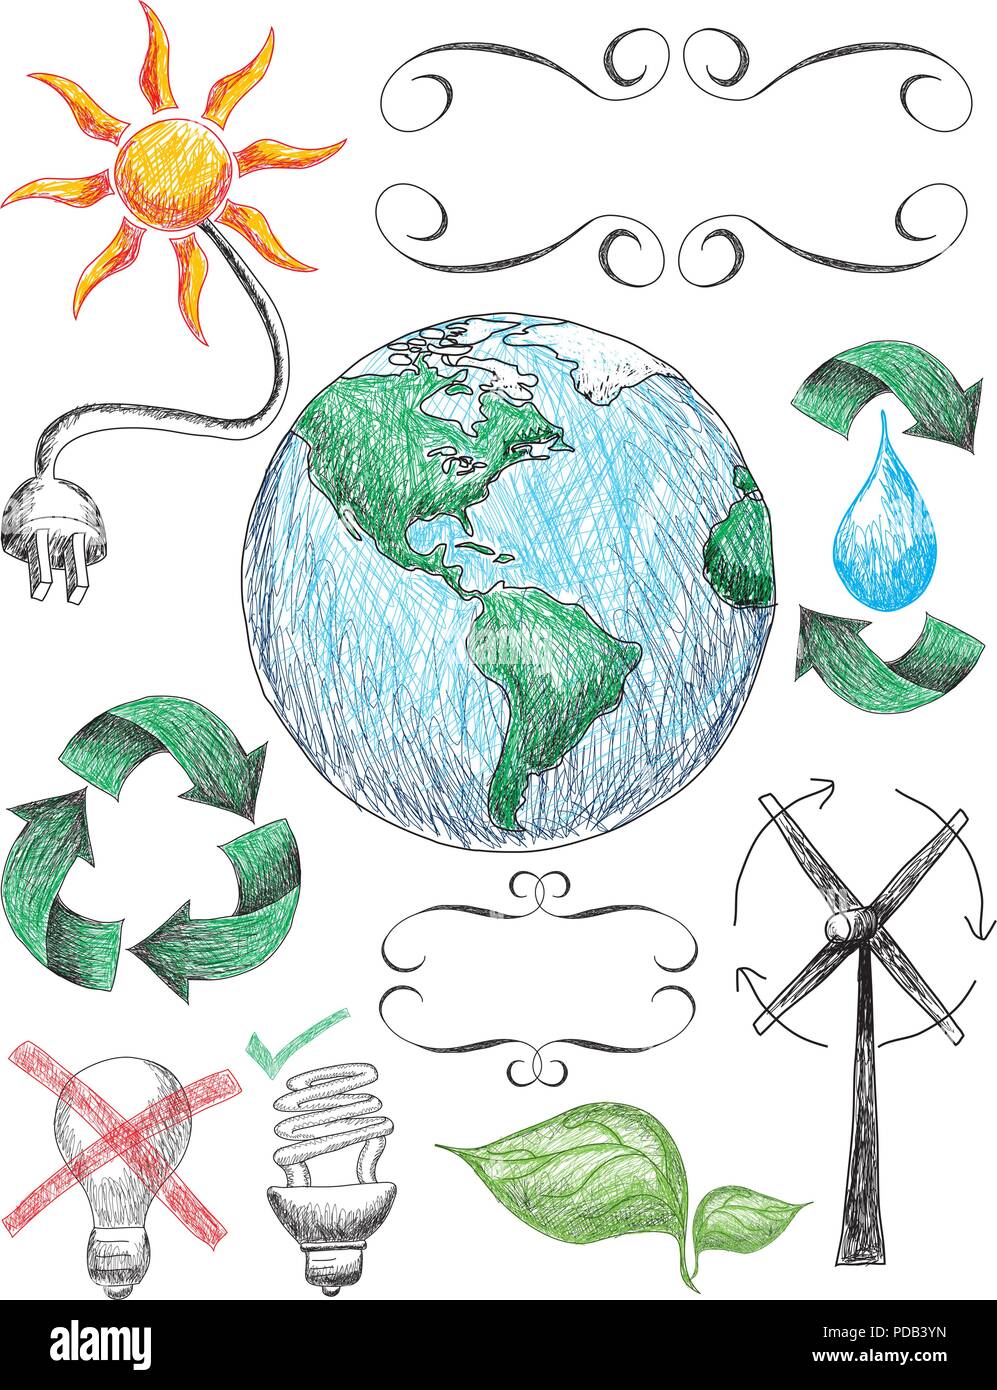 20+ Unique Reduce, Reuse, Recycle Posters and Drawing Ideas